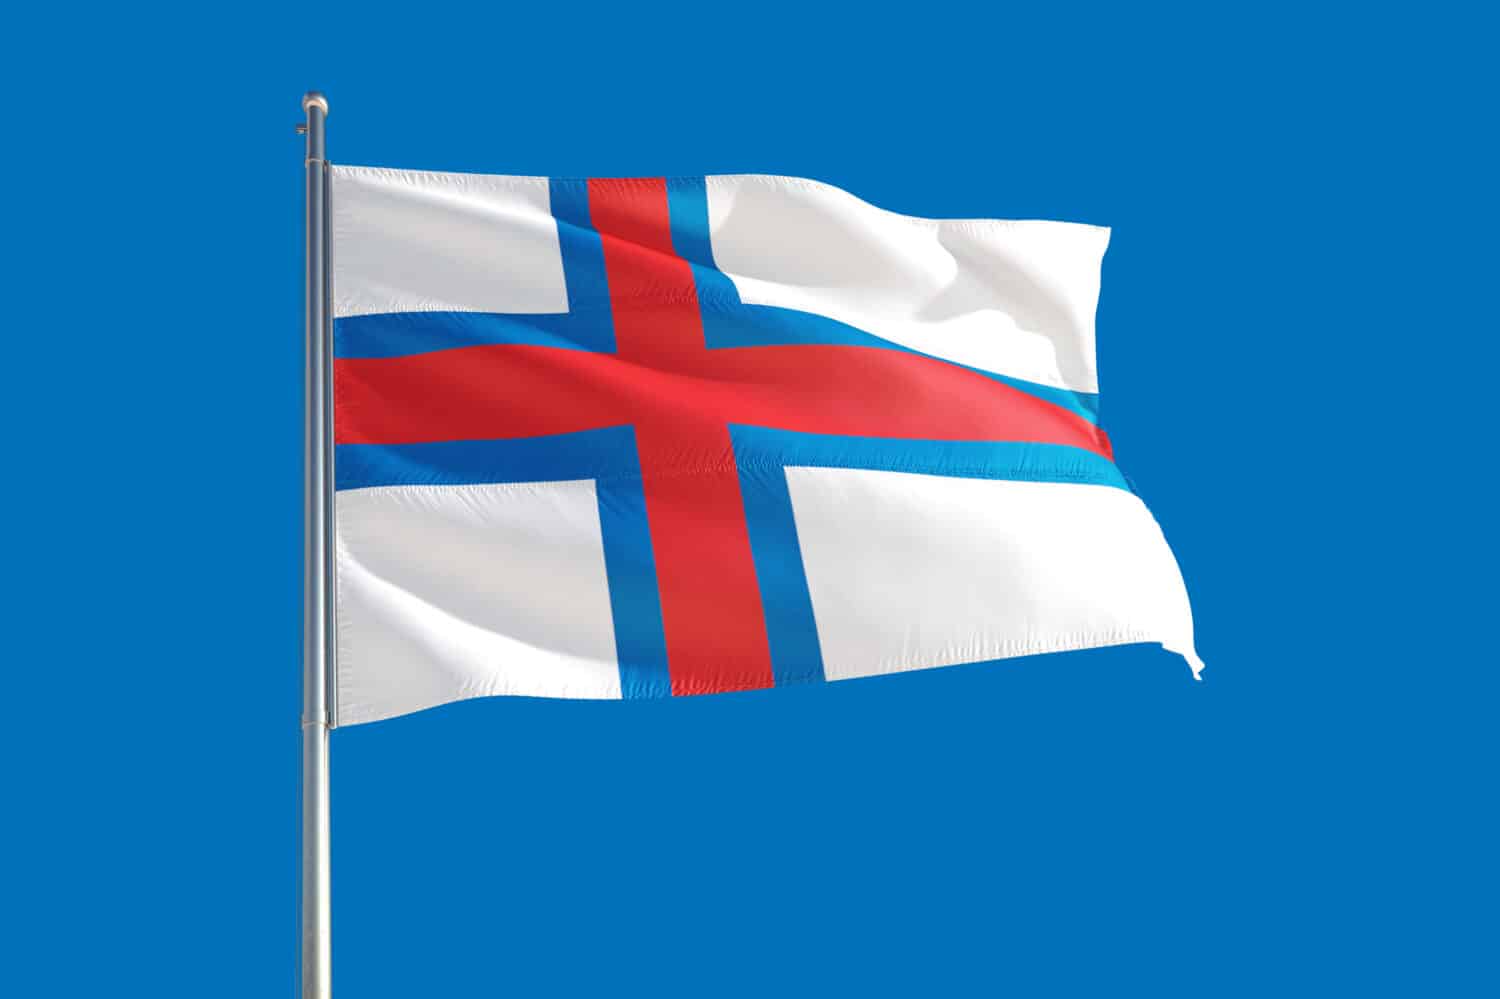 Faroe Islands national flag waving in the wind on a deep blue sky. High quality fabric. International relations concept.